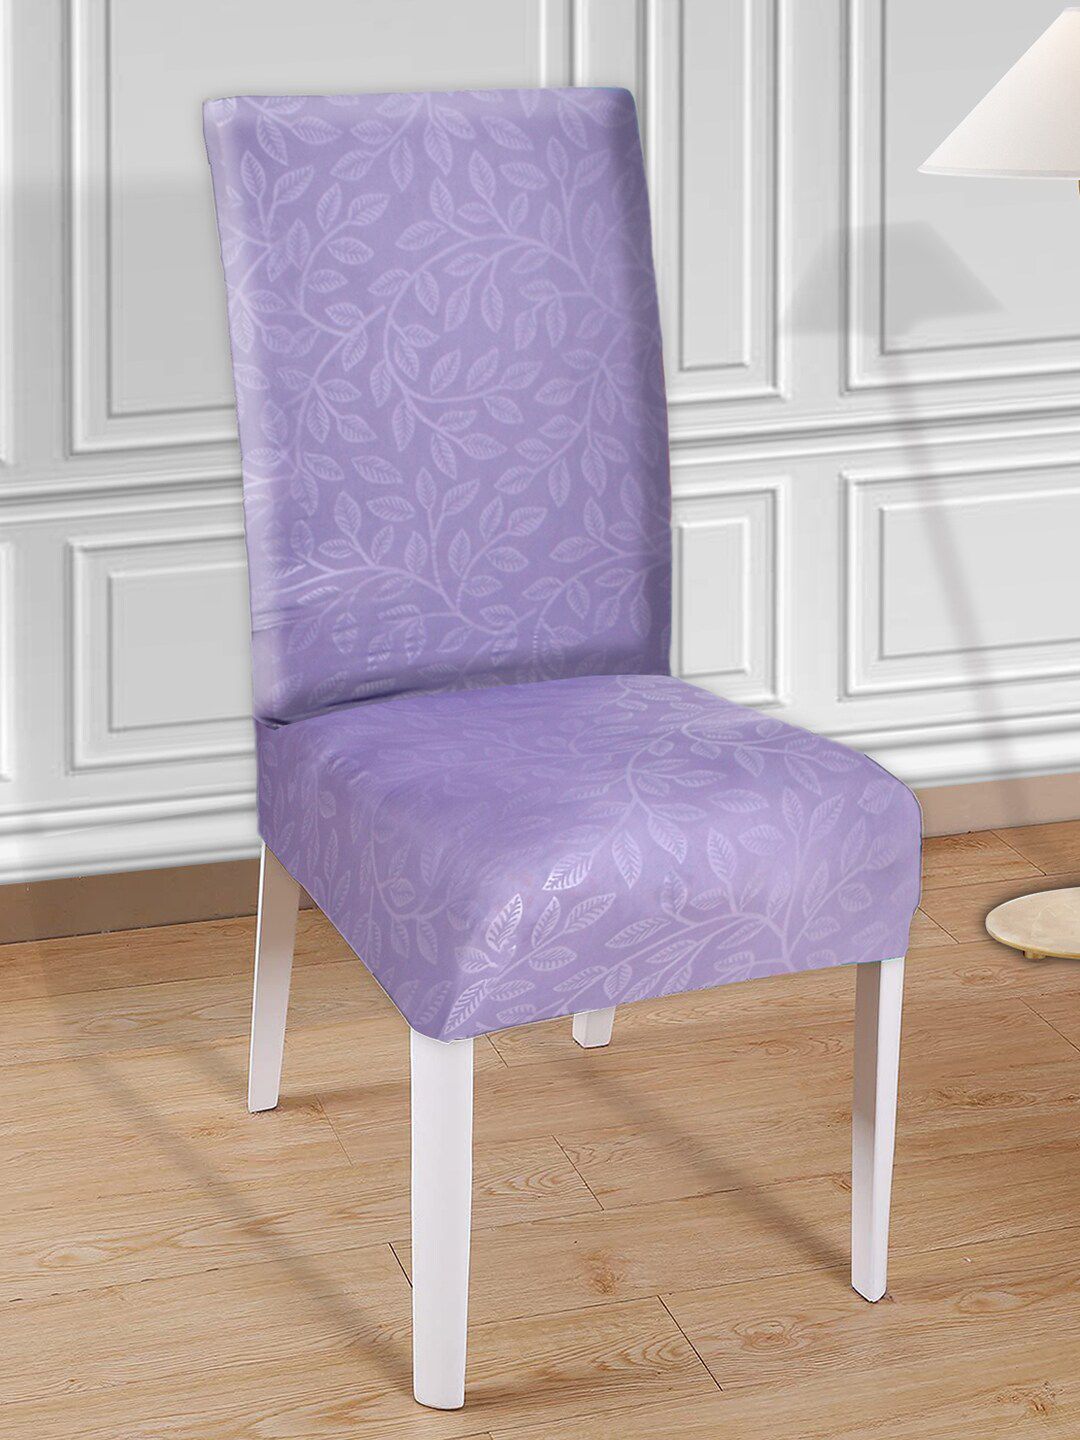 Kuber Industries Purple Leaf Printed Stretchable Polyster Chair Cover Price in India